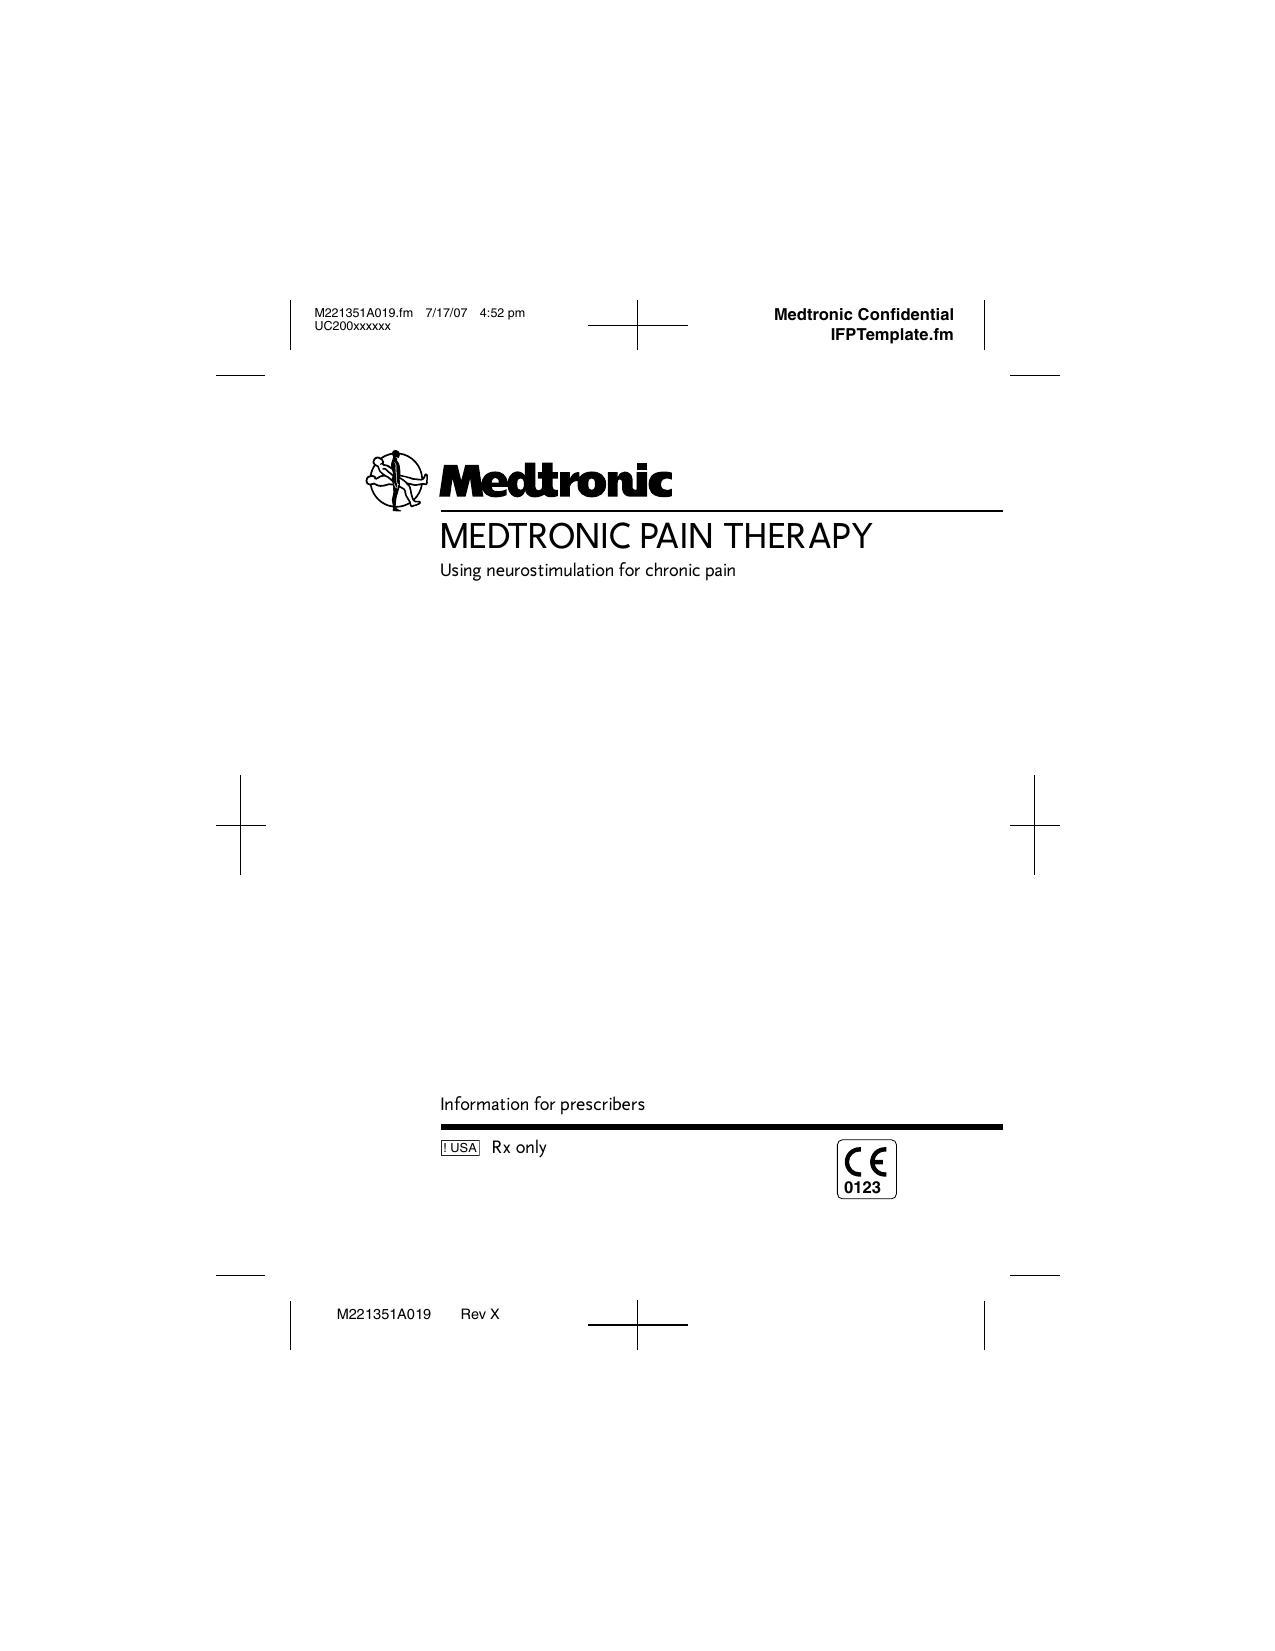 medtronic-pain-therapy-using-neurostimulation-for-chronic-pain-information-for-prescribers.pdf